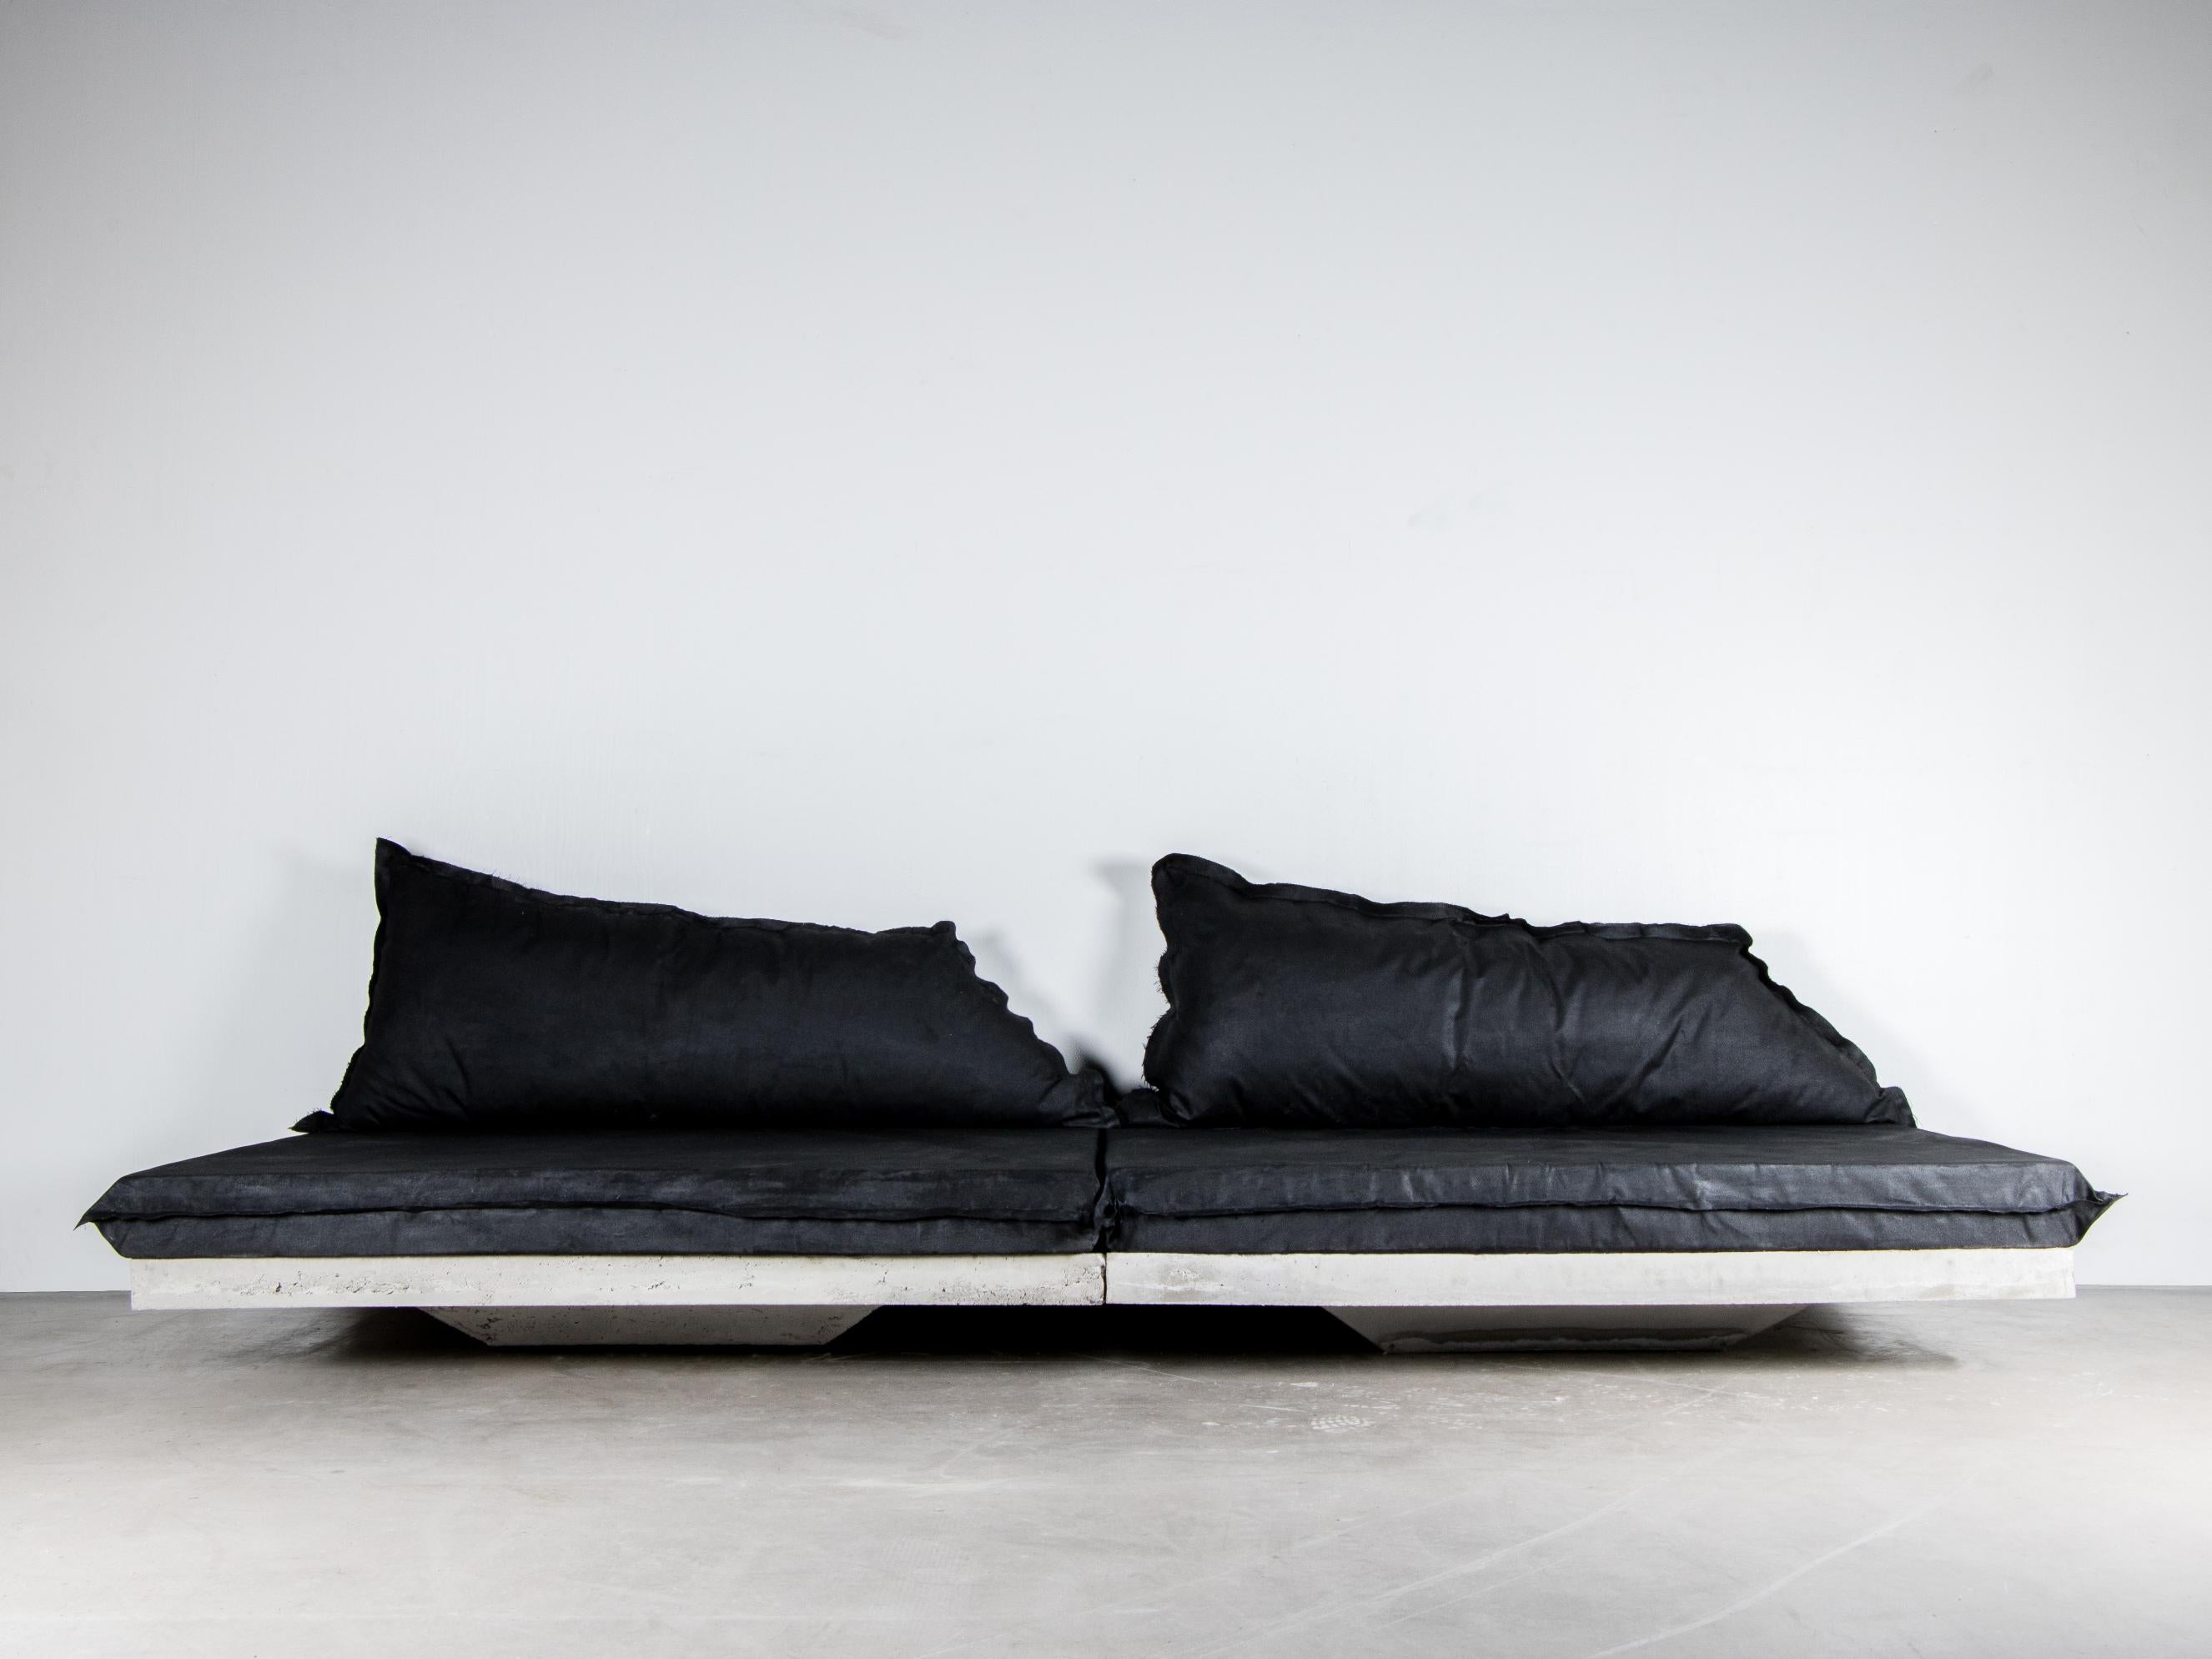 SVÄV sofa by Lucas Tyra Morten
2021
Limited edition of 19
Price per 2 modules
Module dimensions: H 32, D 110, W 140 cm
Module weight: 100 kg.
Material: concrete and hand-waxed upholstered cushion.

Occupying the liminal space between art and design,